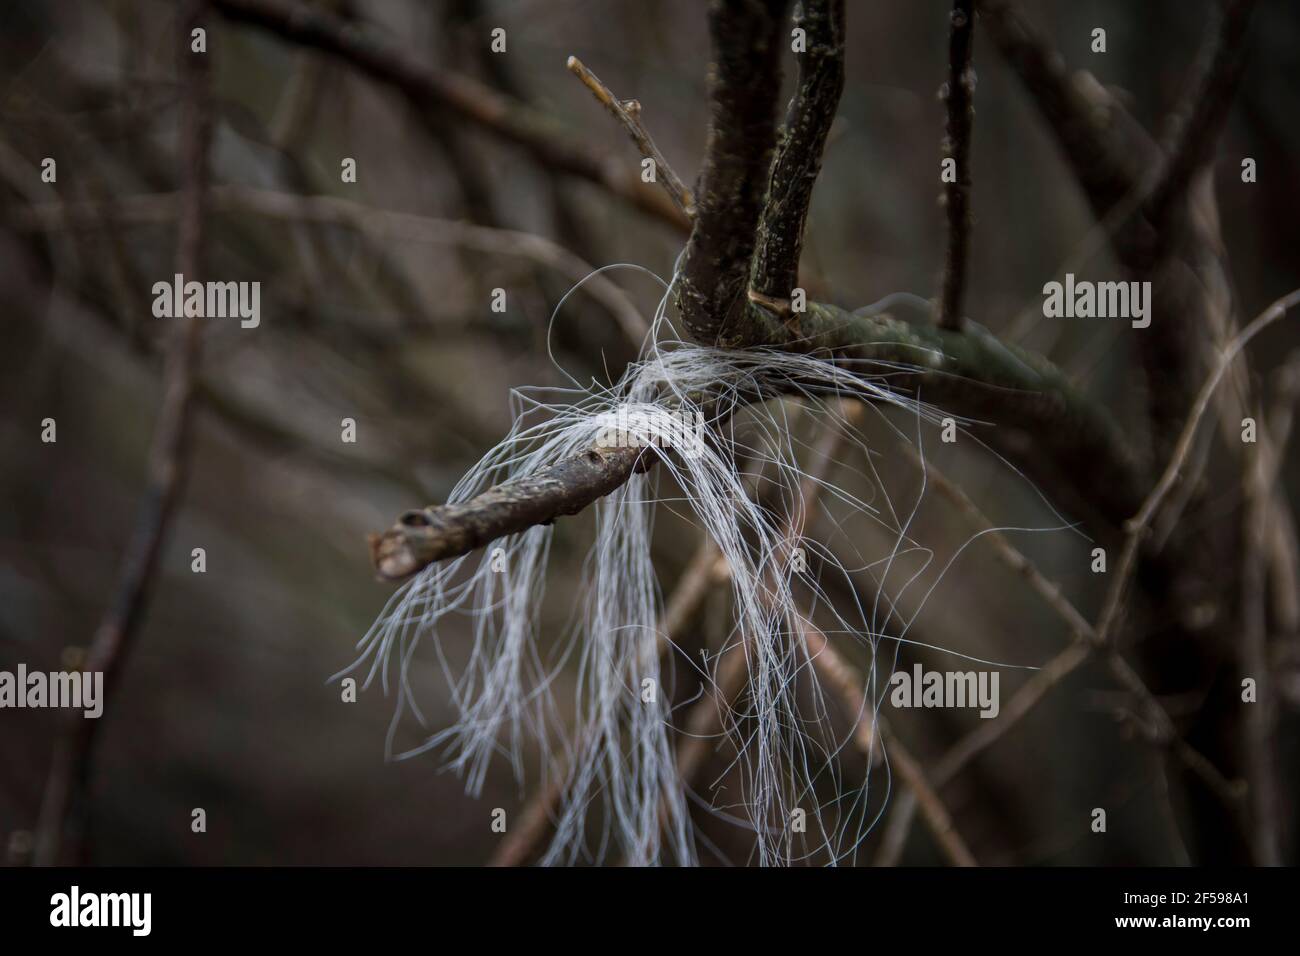 Wild horse white hair stuck in tree branches from back scratching Stock Photo